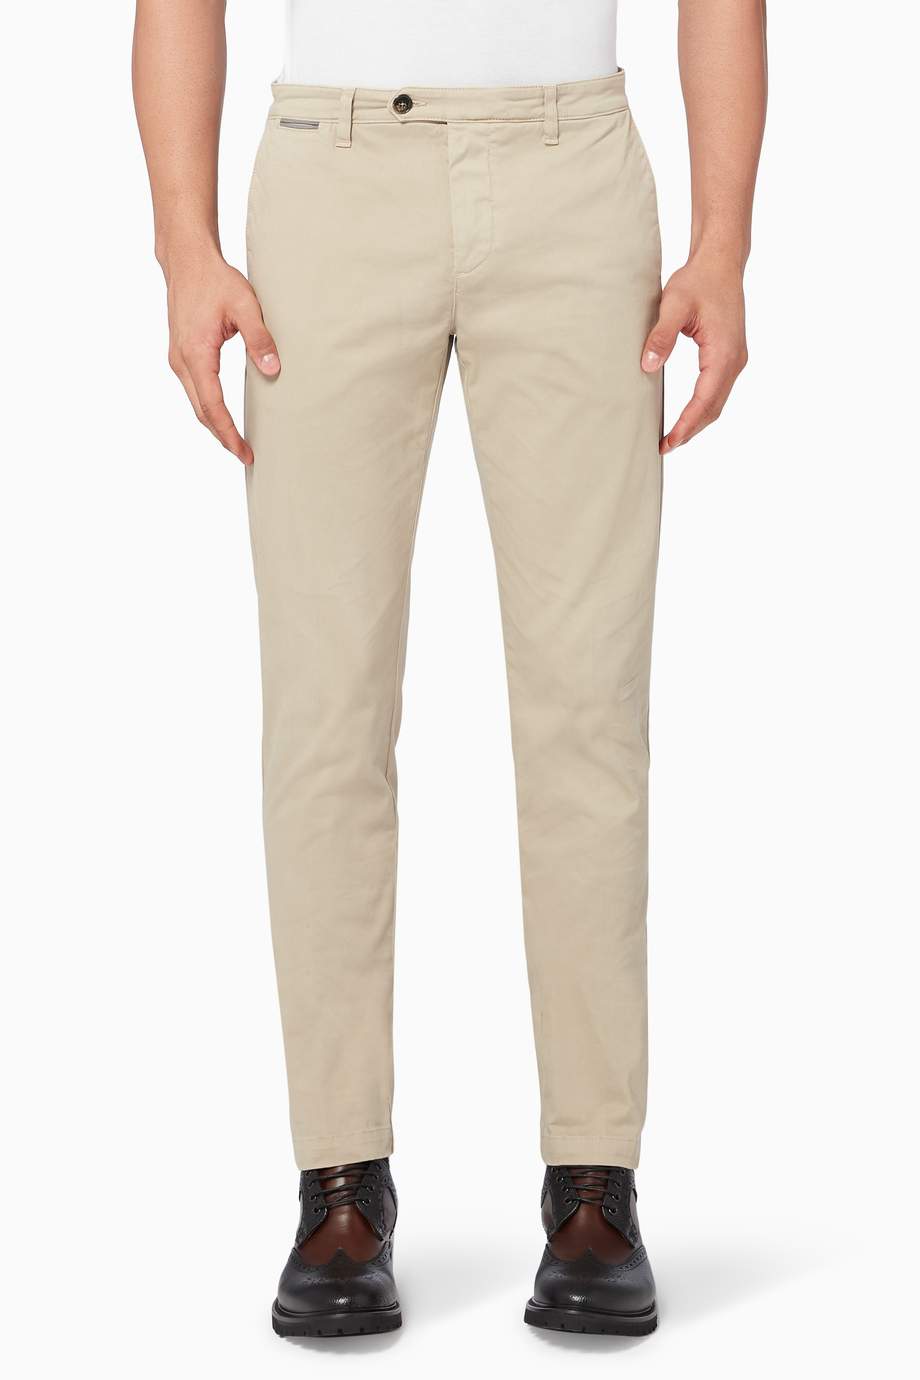 Shop Eleventy Neutral Stretch Cotton Chino Pants for Men | Ounass UAE